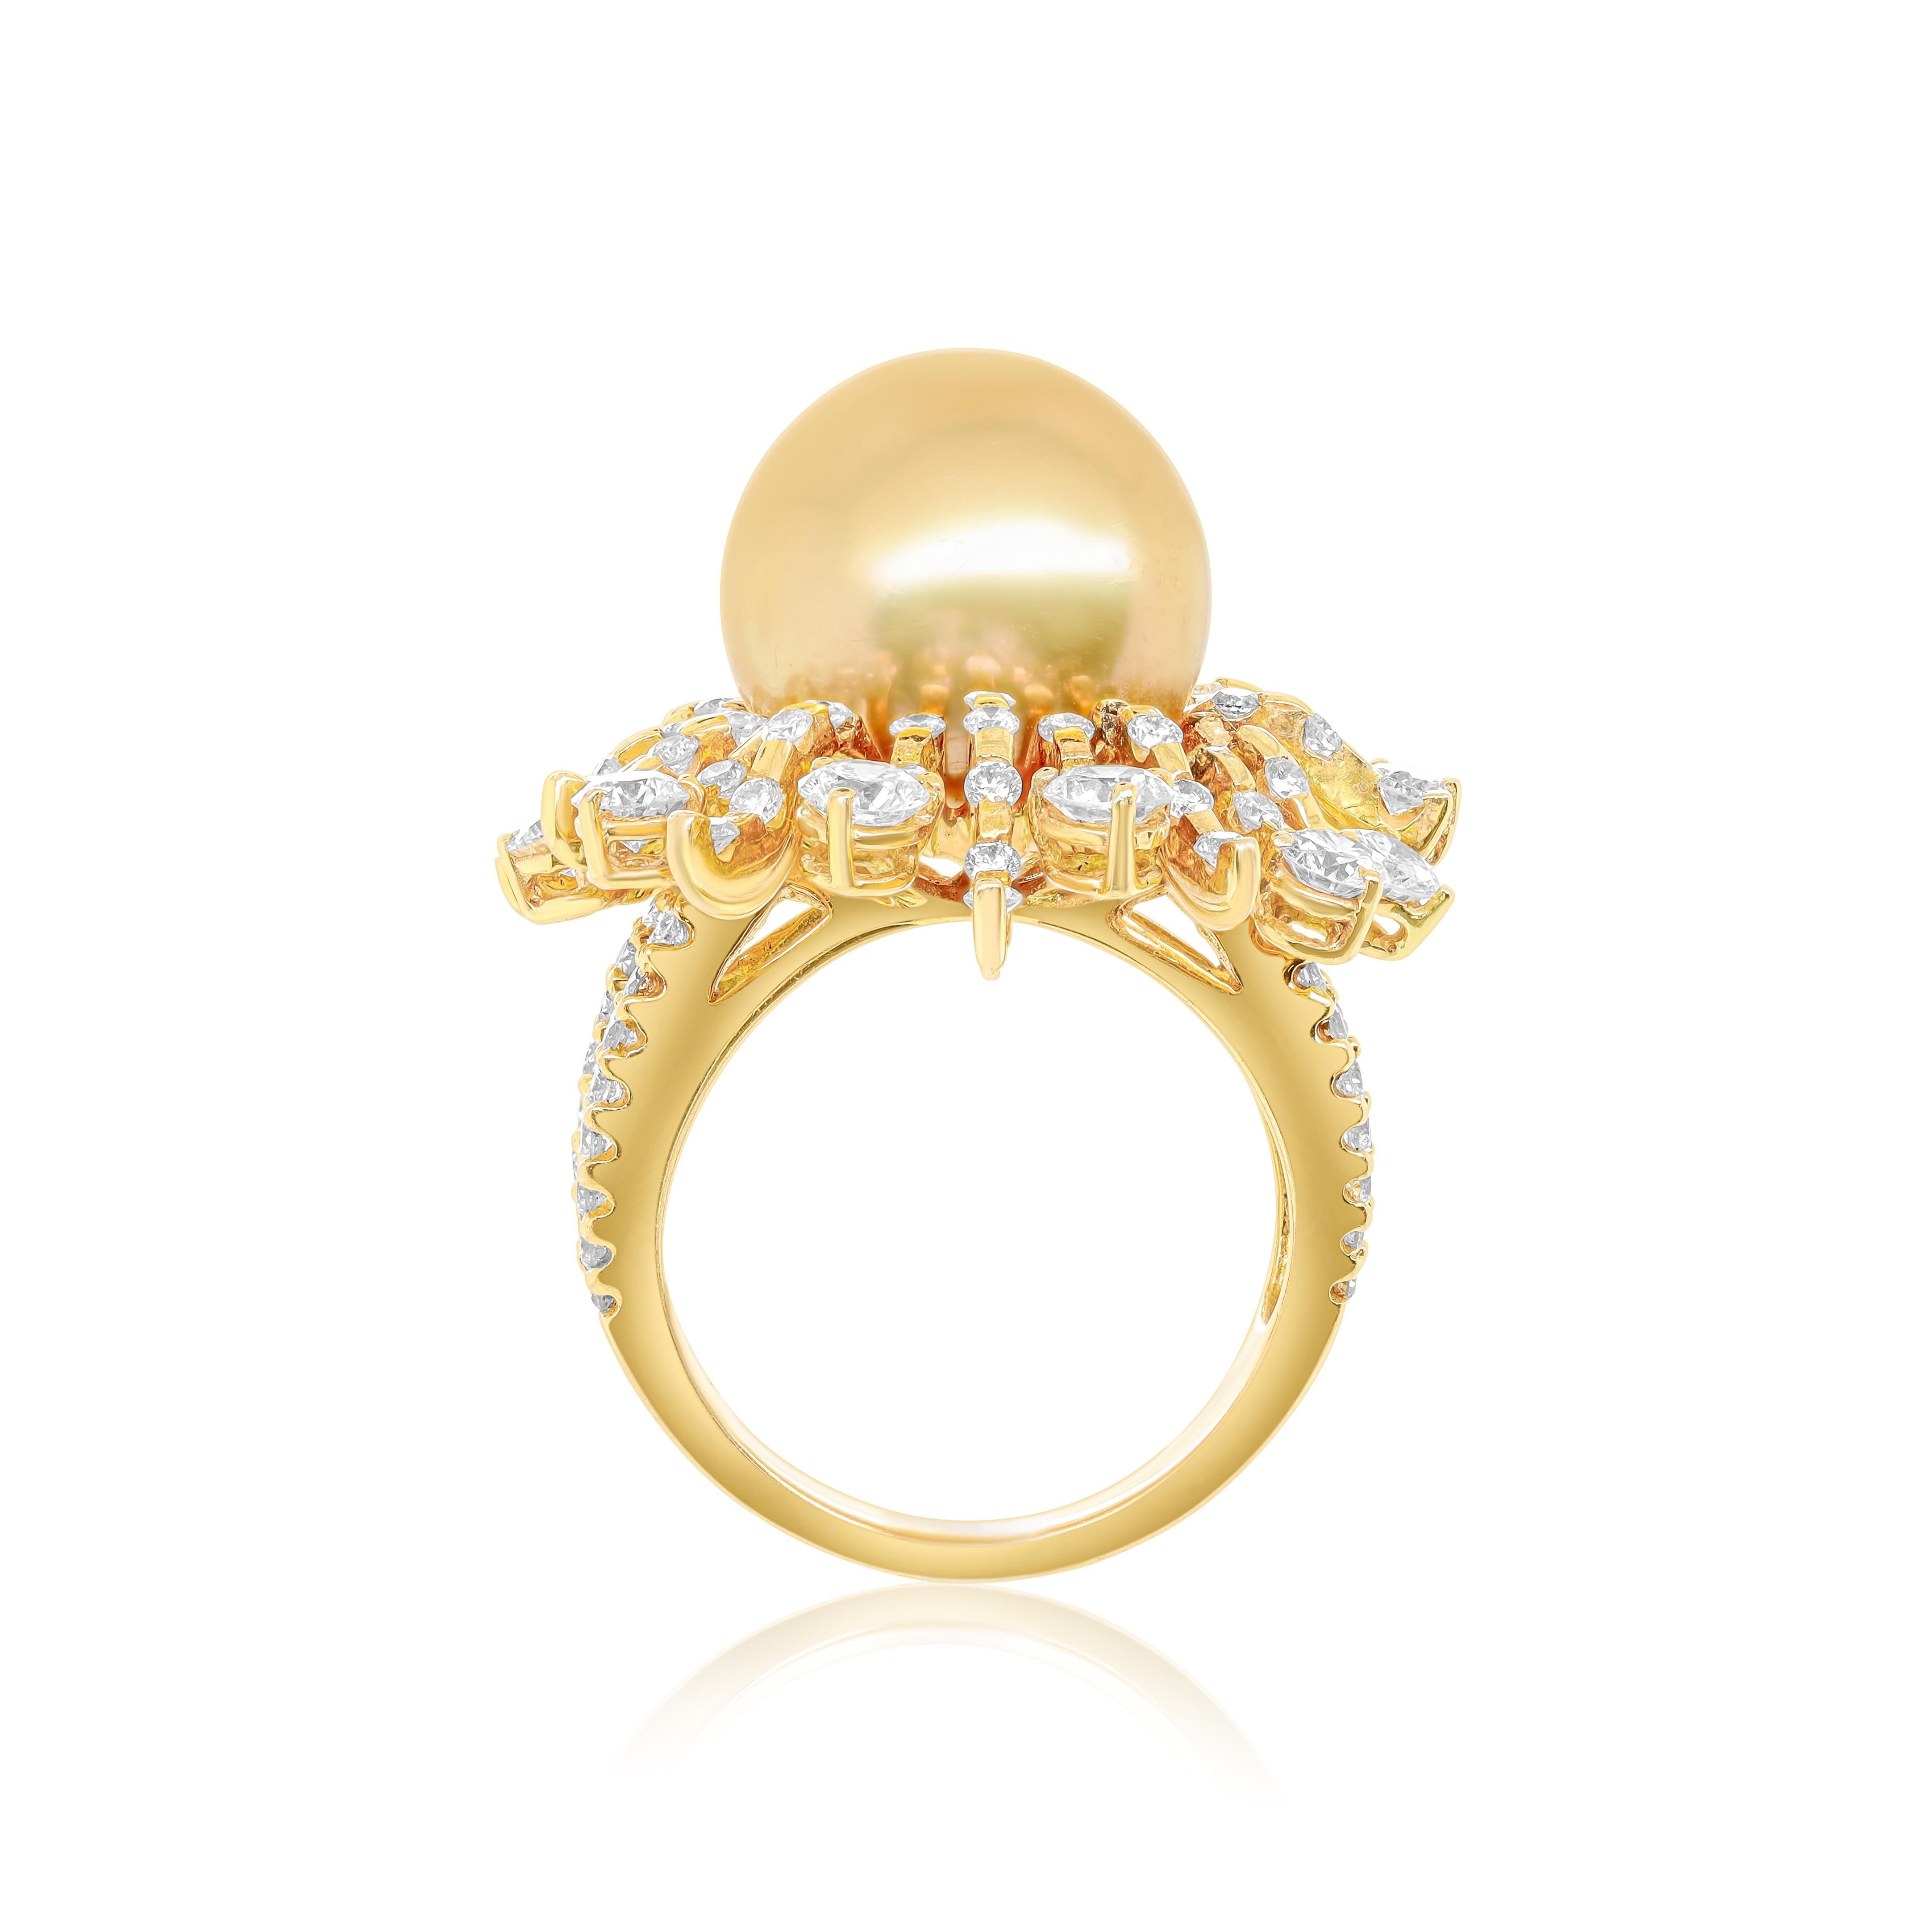 Modern Diana M.18 kt yellow gold diamond and pearl ring featuring a 13.5 mm yellow pear For Sale